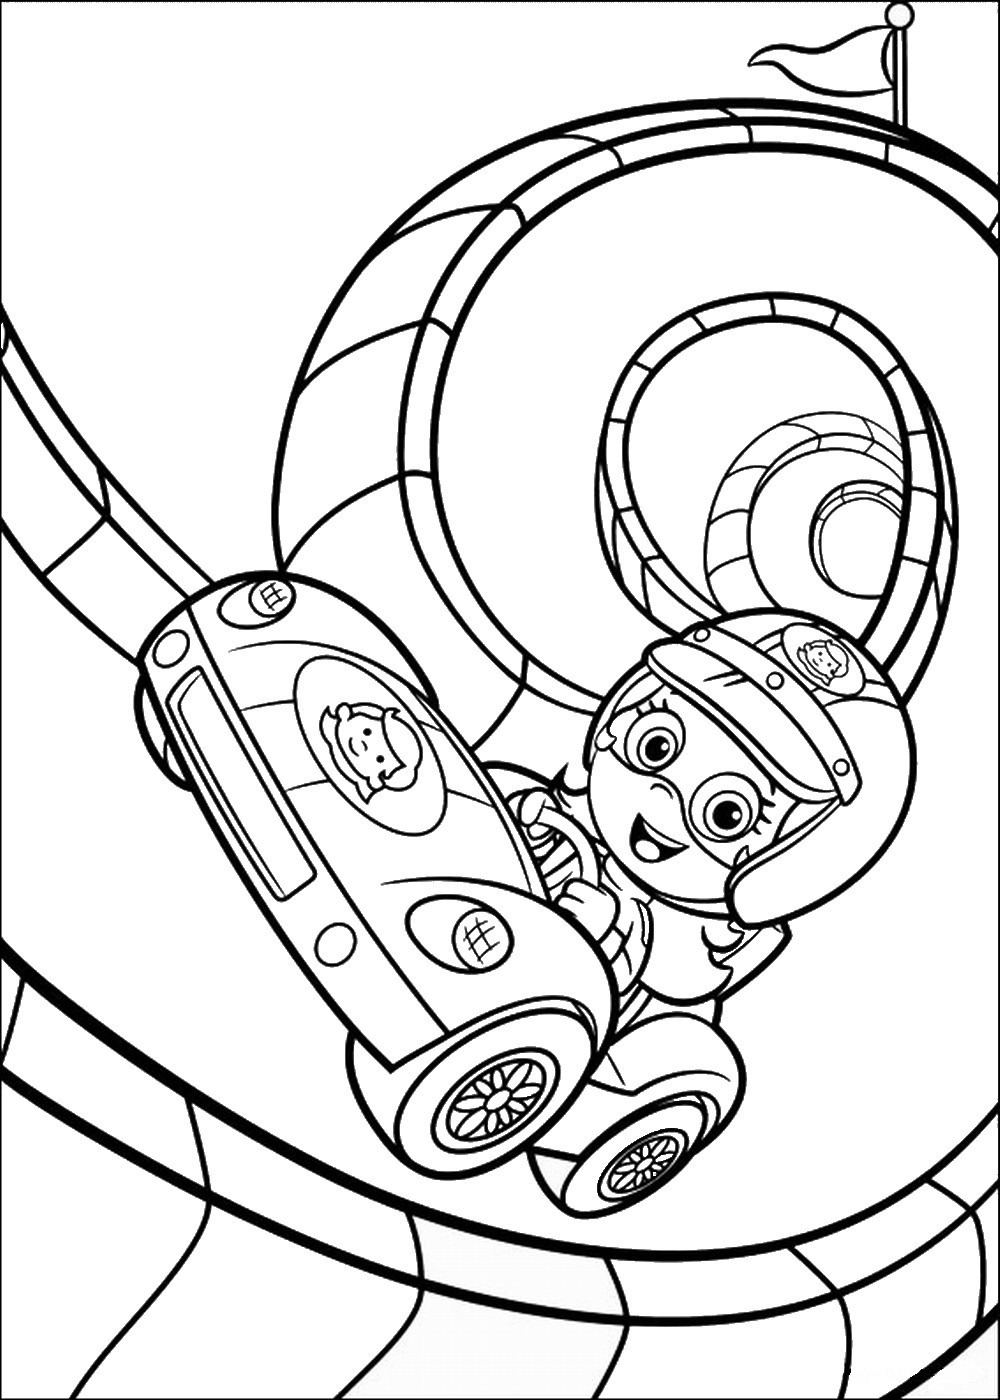 Kids Coloring Print
 Bubble Guppies Coloring Pages Best Coloring Pages For Kids